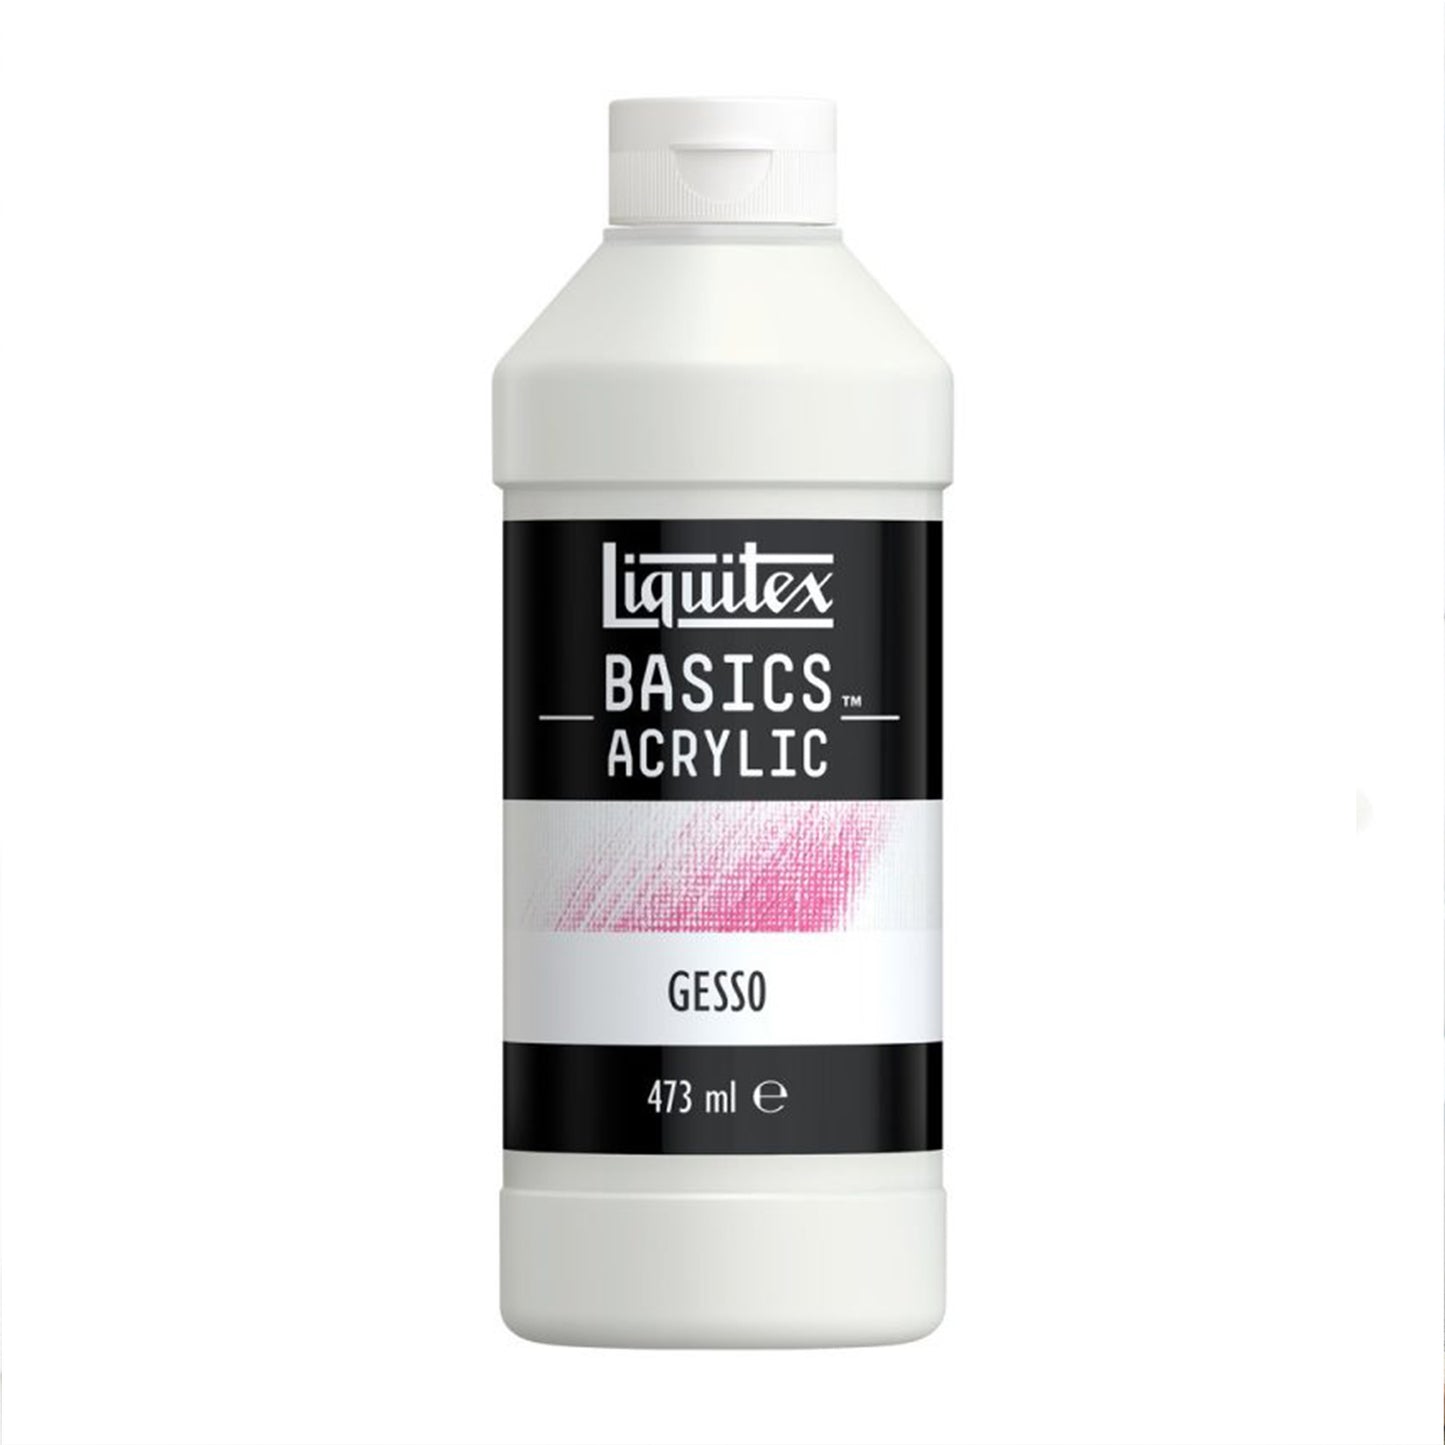 A bottle of white paint that reads, "Liquitex - Basic Acrylic - Gesso"